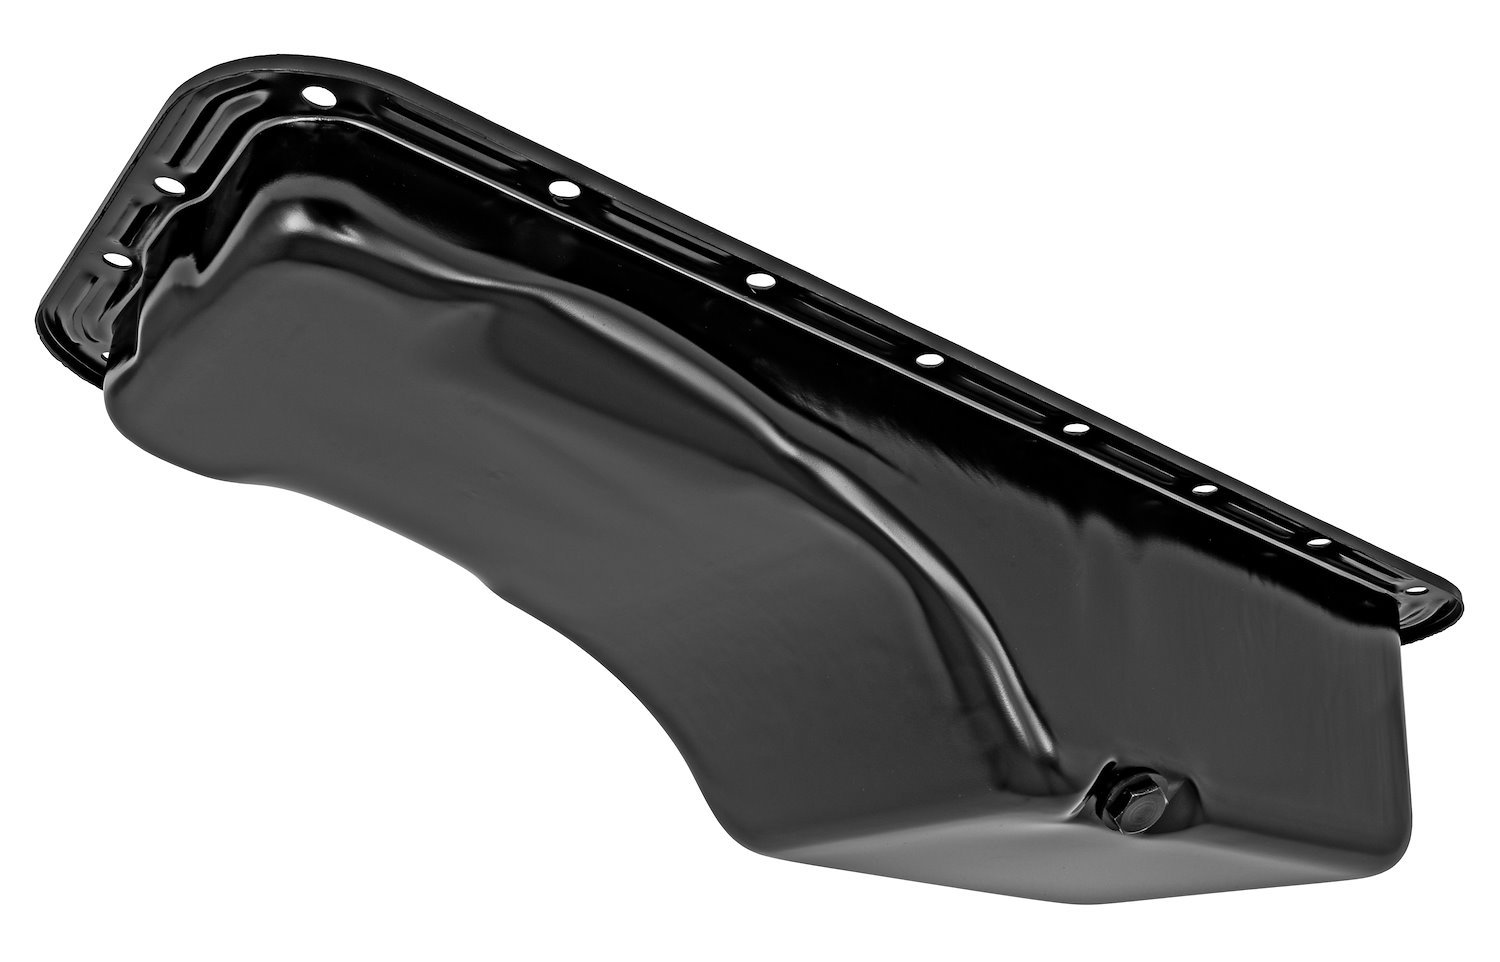 Stock-Style Replacement Oil Pan for 1958-1971 Ford FE 352-428 ci. Engines [Black]